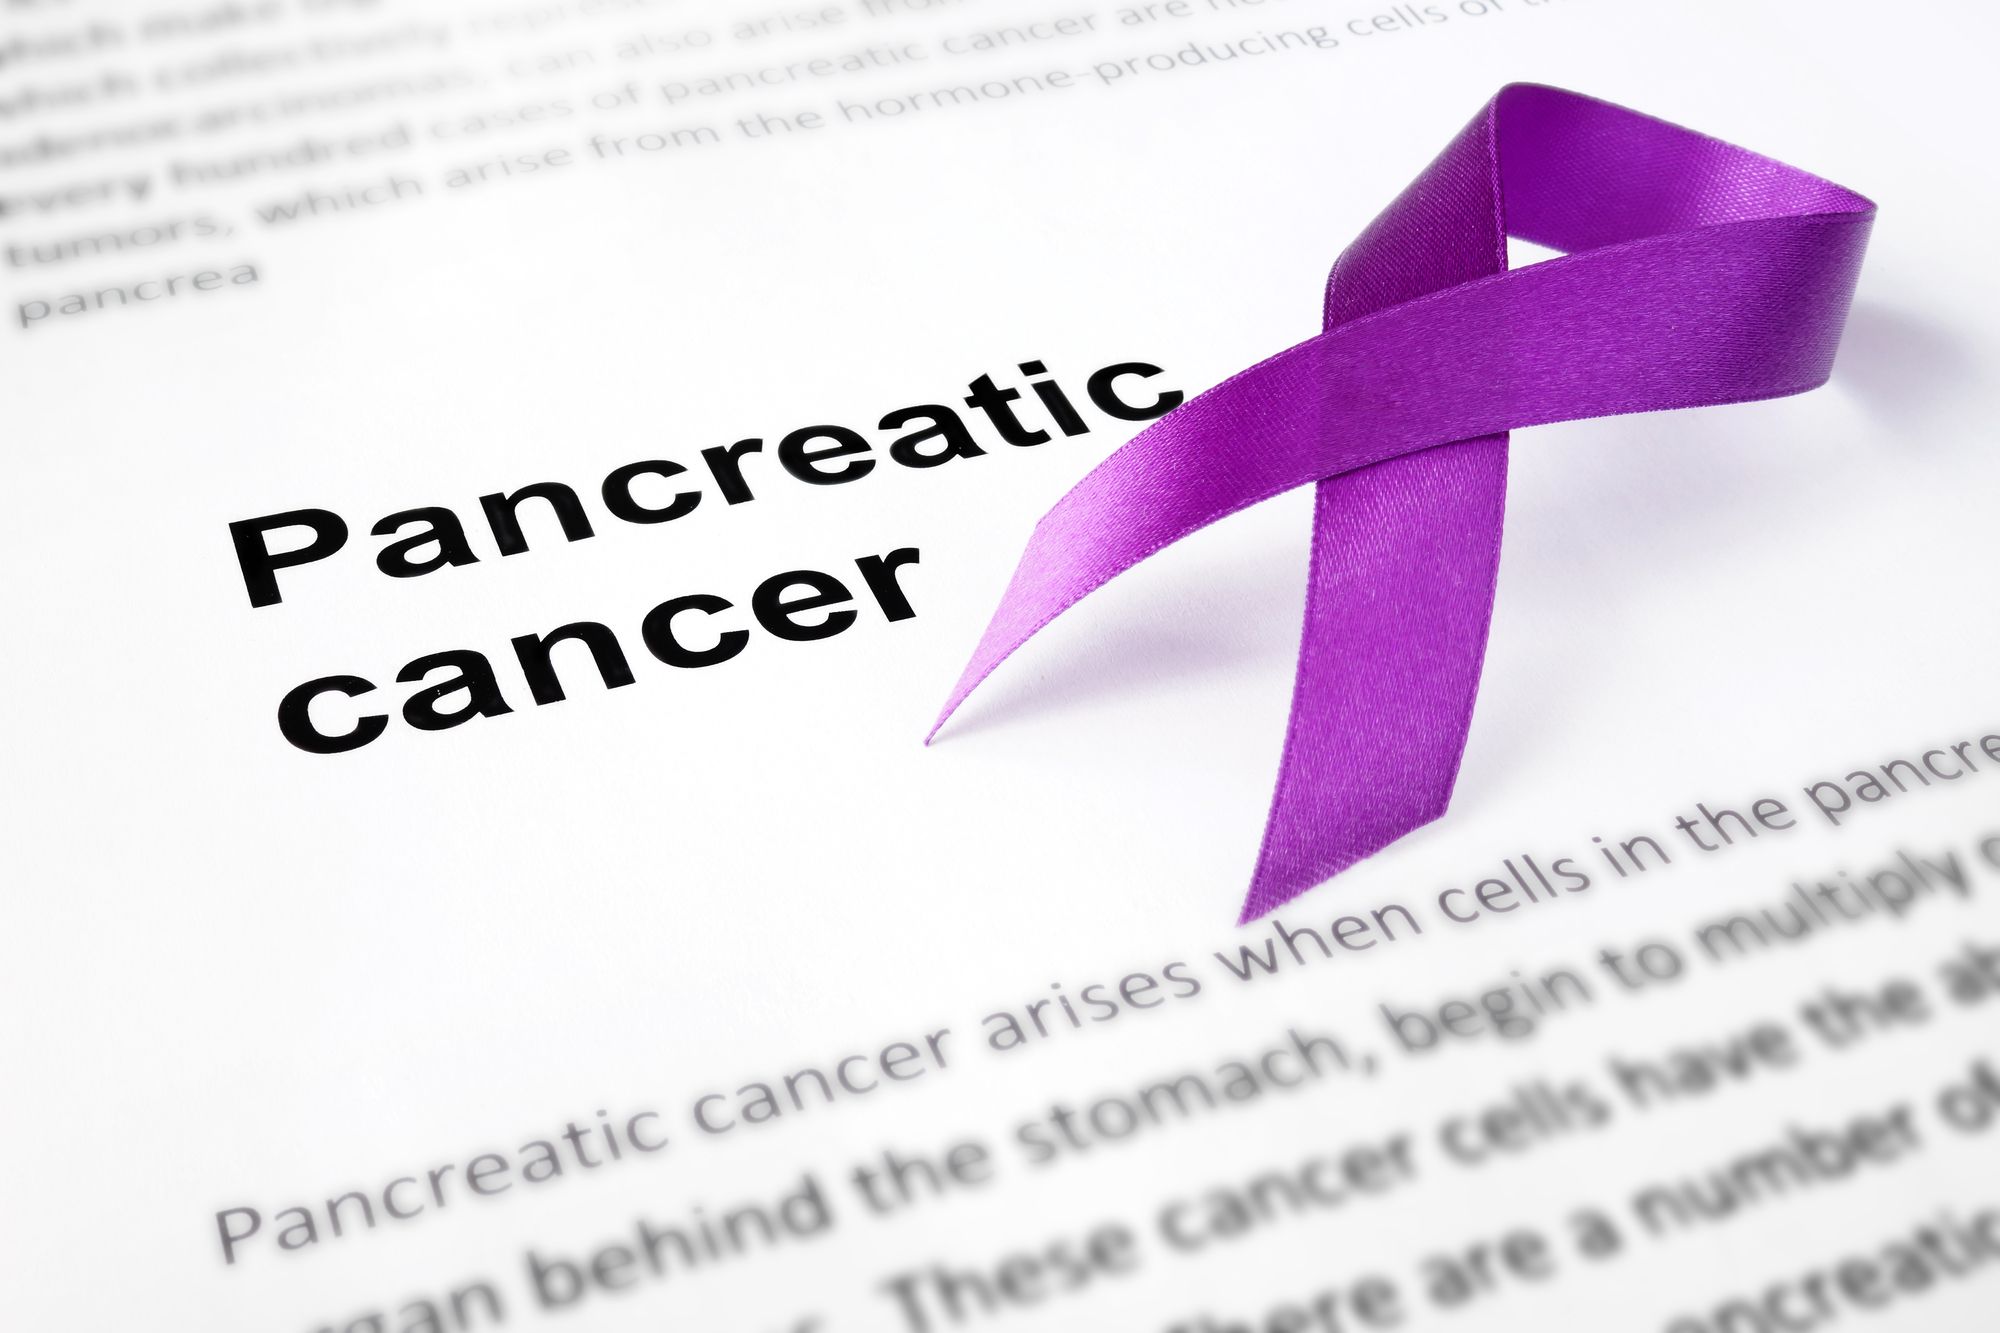 Pancreatic Cancer: Research, Clinical Trials, and Treatment